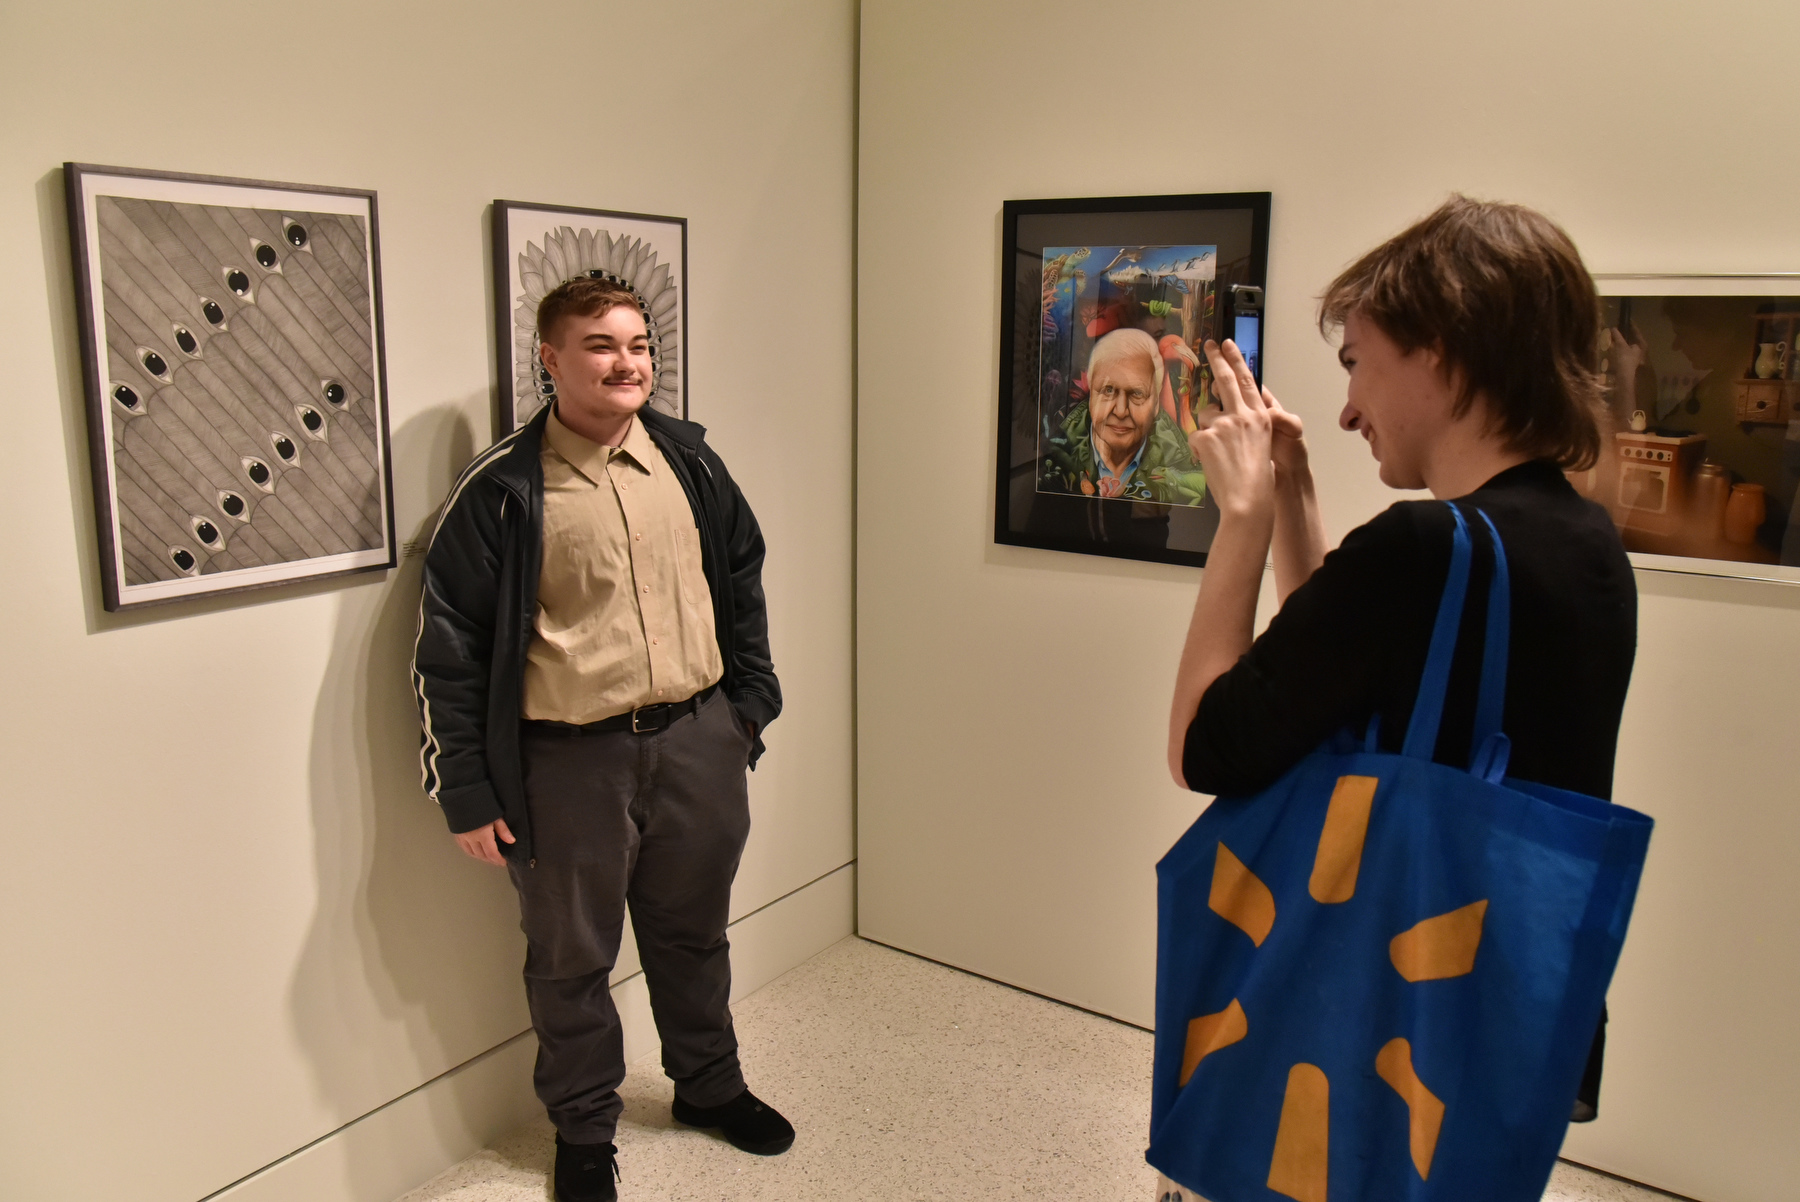 In its 61st year, the Juried Student Art Exhibition annually features works of art created by SUNY Oswego students, open to all students. Jurors selected 99 pieces for this exhibition of various media, styles and approaches, from traditional to digital. Pictured is artist Danny Rafferty and friend with his paintings and drawings. The show ran from Jan. 26 to Feb. 18, in Tyler Art Gallery.